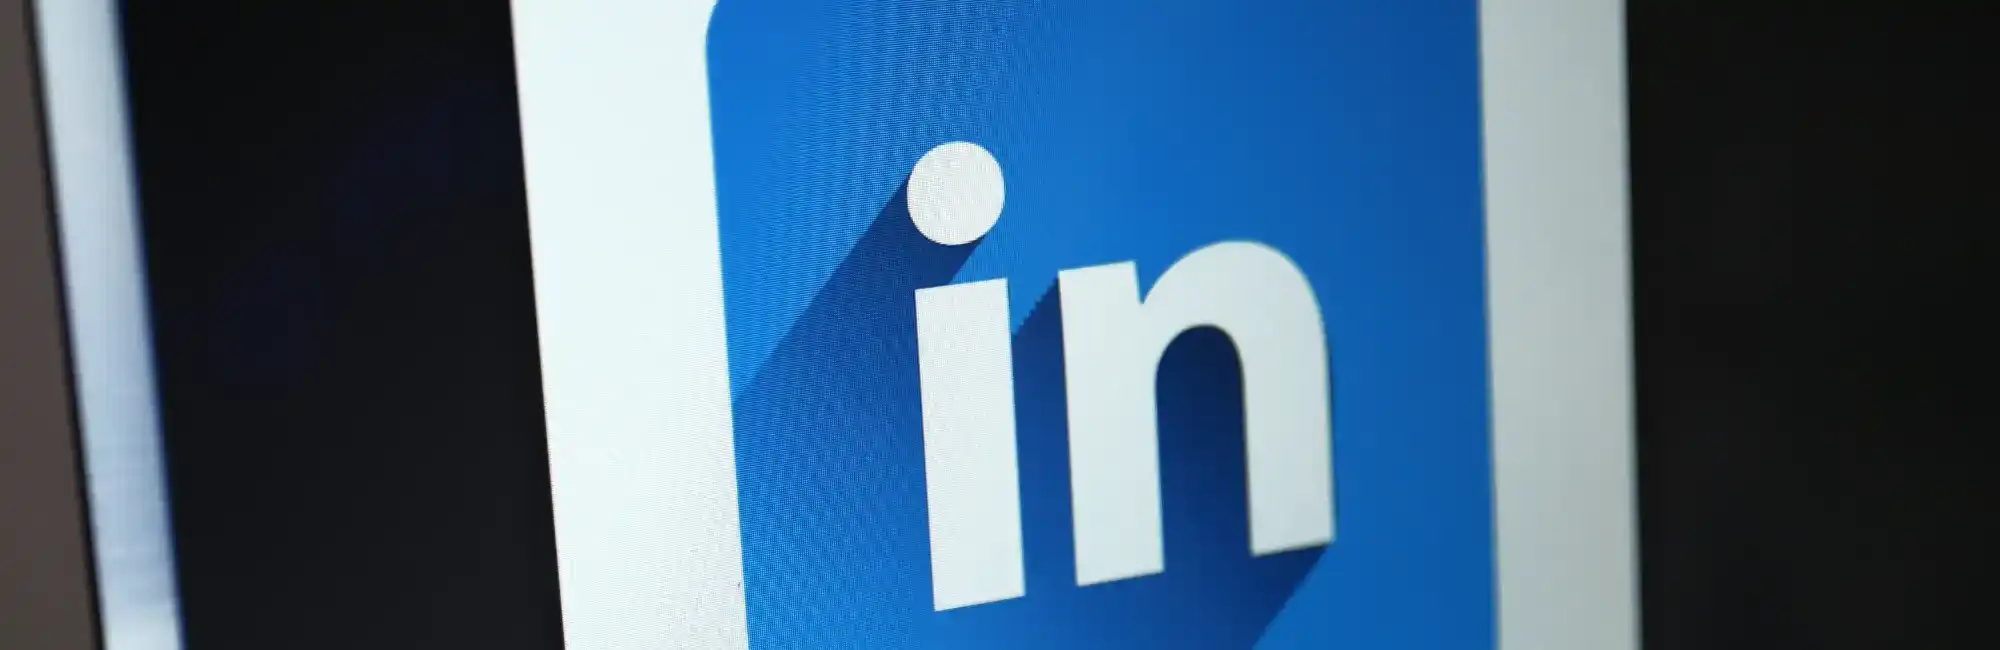 How to get headhunted on LinkedIn as a Legal BD & Marketing professional